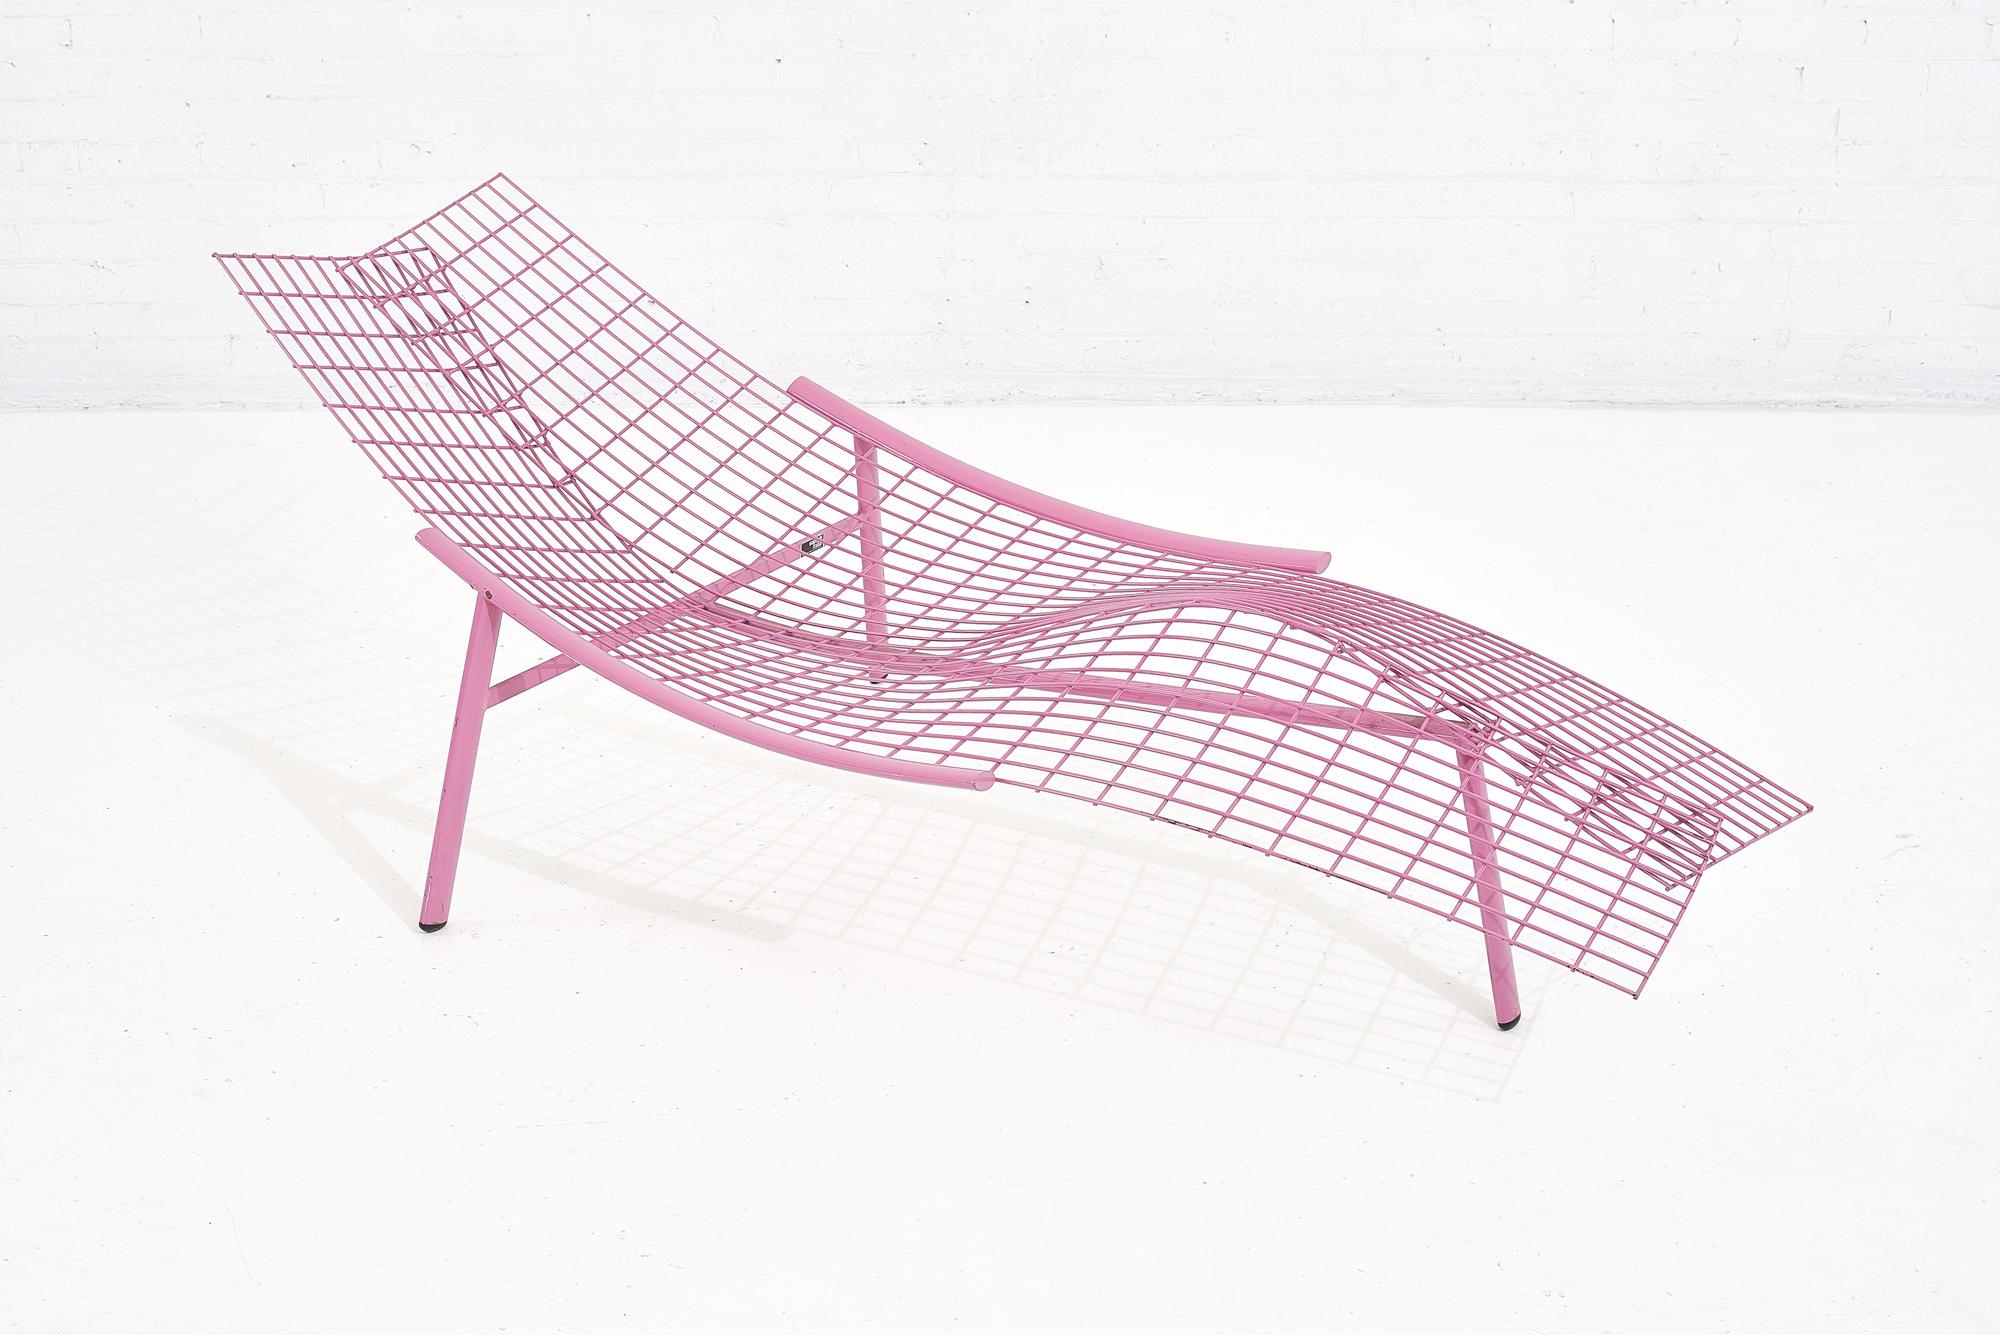 Saporiti chaise lounge in Missoni Fabric by Giovanni Offredi, 1980 Italy. Chaise Lounge is original.